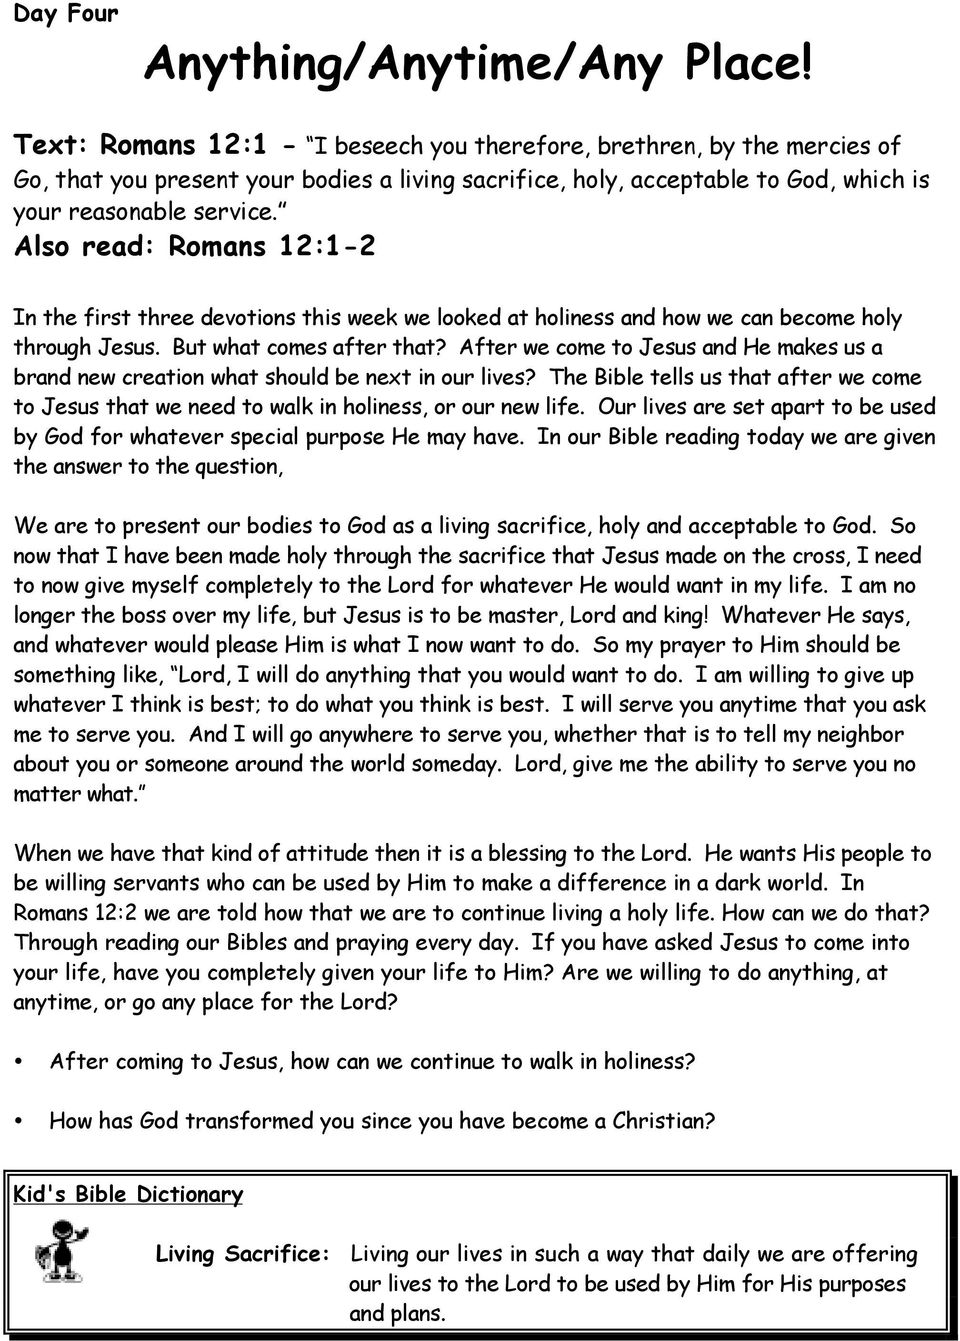 Also read: Romans 12:1-2 In the first three devotions this week we looked at holiness and how we can become holy through Jesus. But what comes after that?